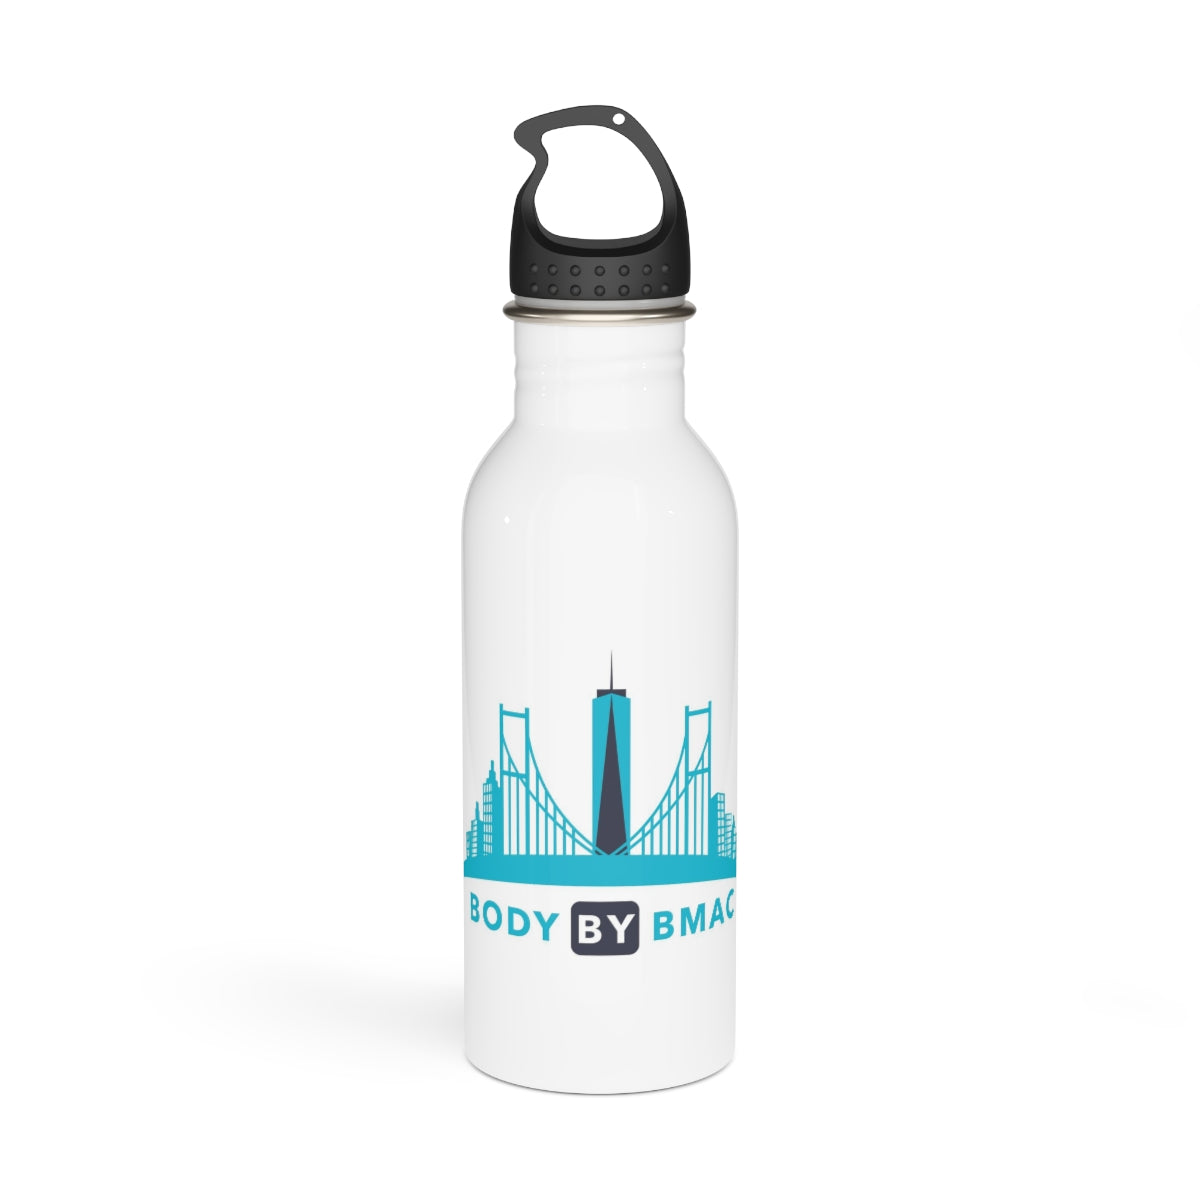 Body By Bmac Stainless Steel Water Bottle - IsGoodBrand